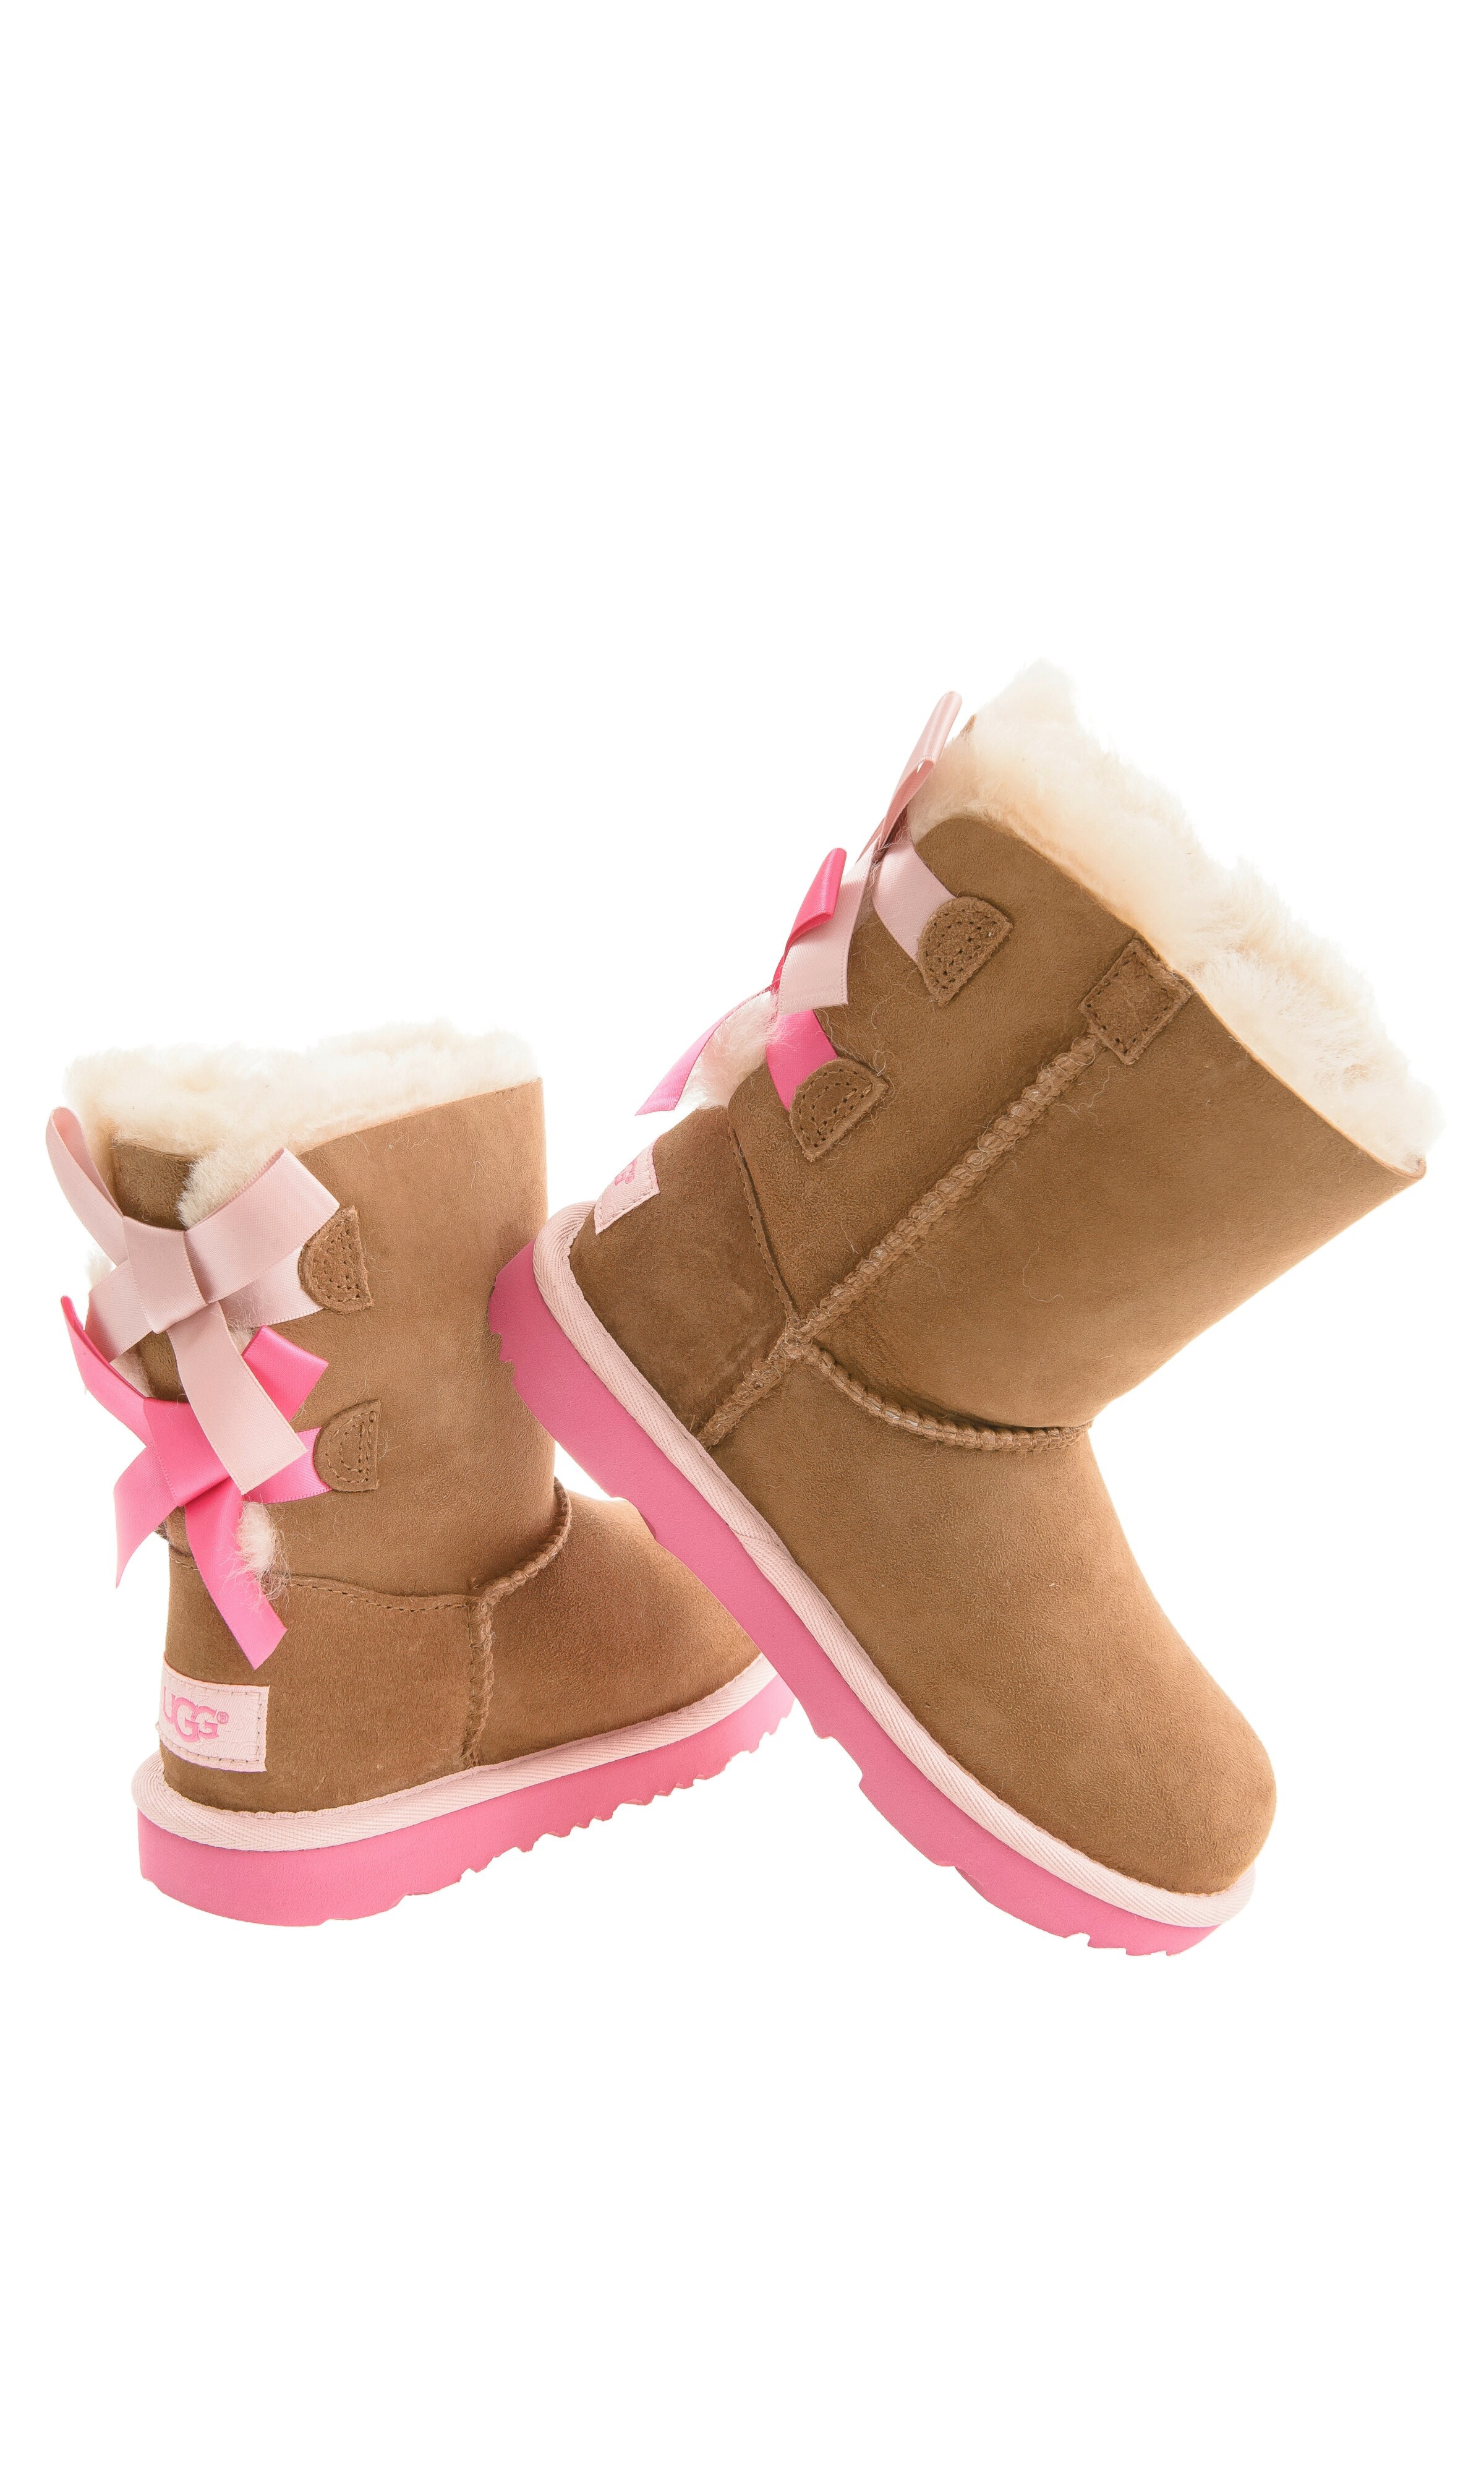 brown uggs with pink bows